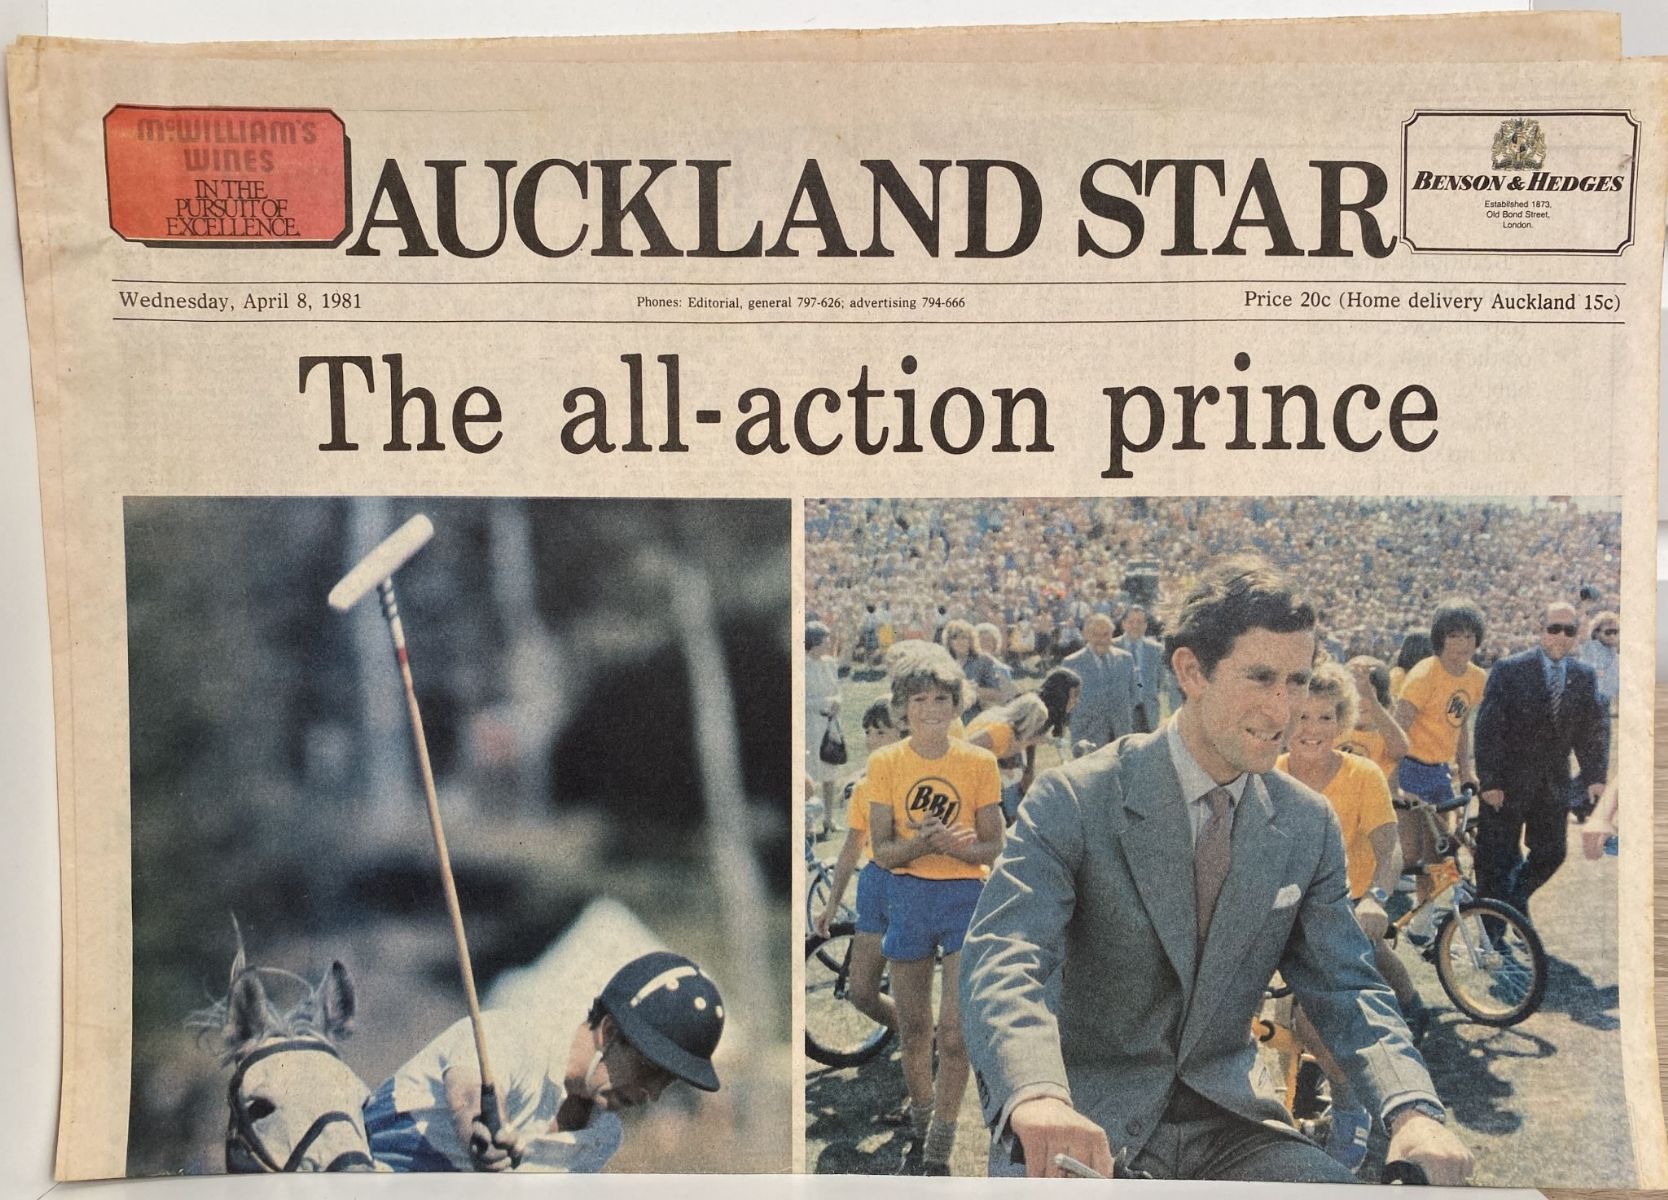 OLD NEWSPAPER: The Auckland Star, 8th April 1981 - Charles and Diana Royal tour